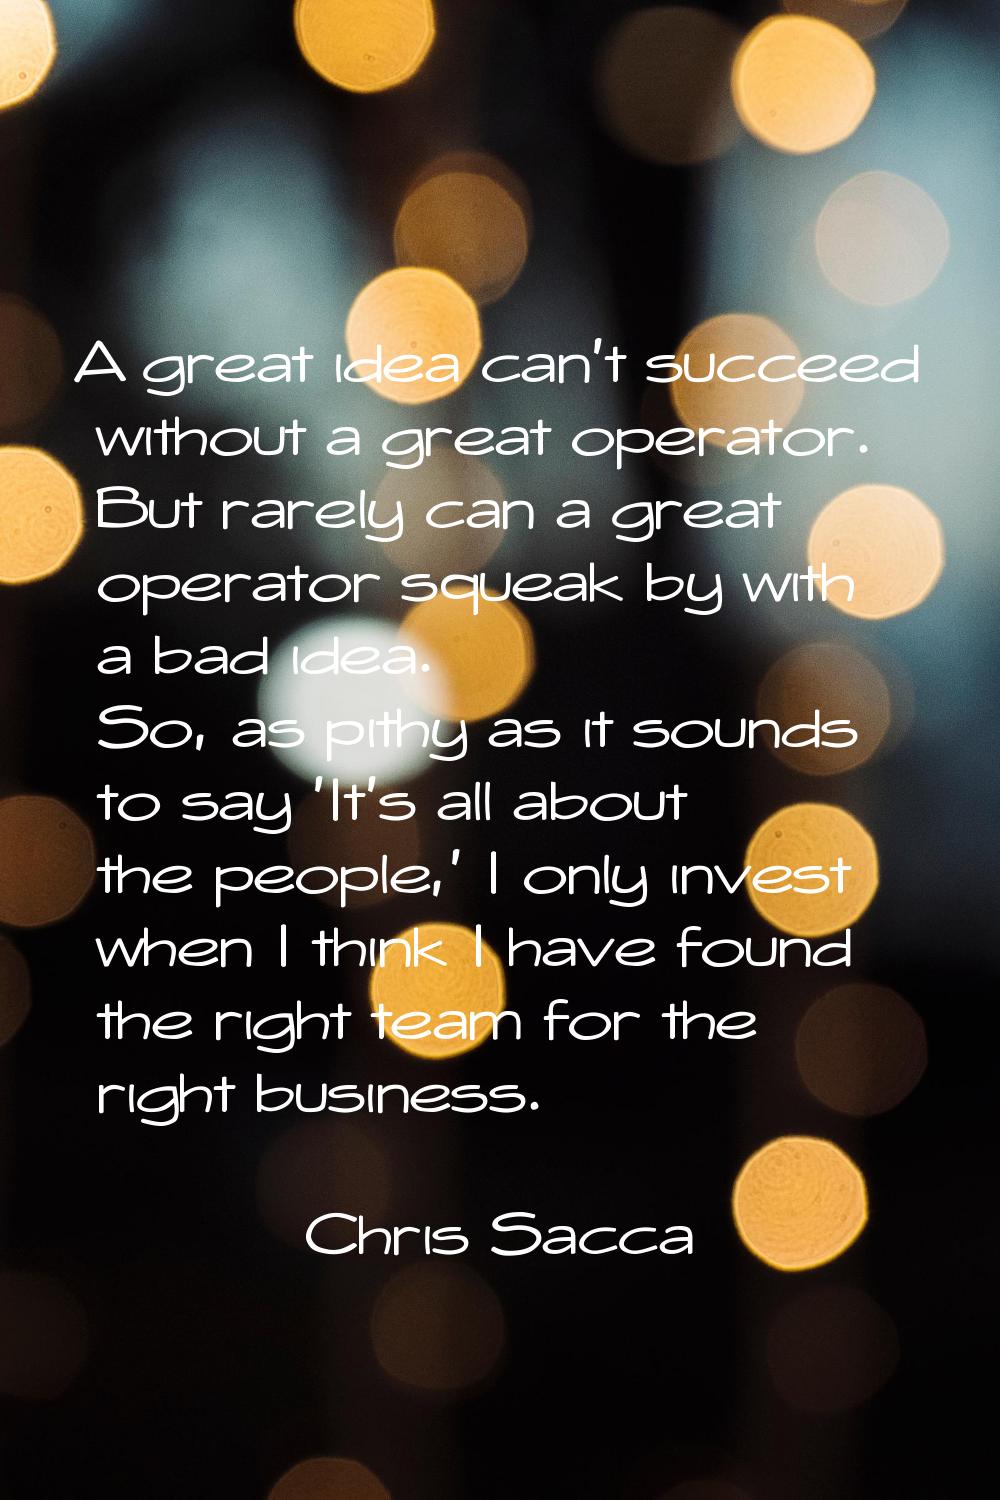 A great idea can't succeed without a great operator. But rarely can a great operator squeak by with